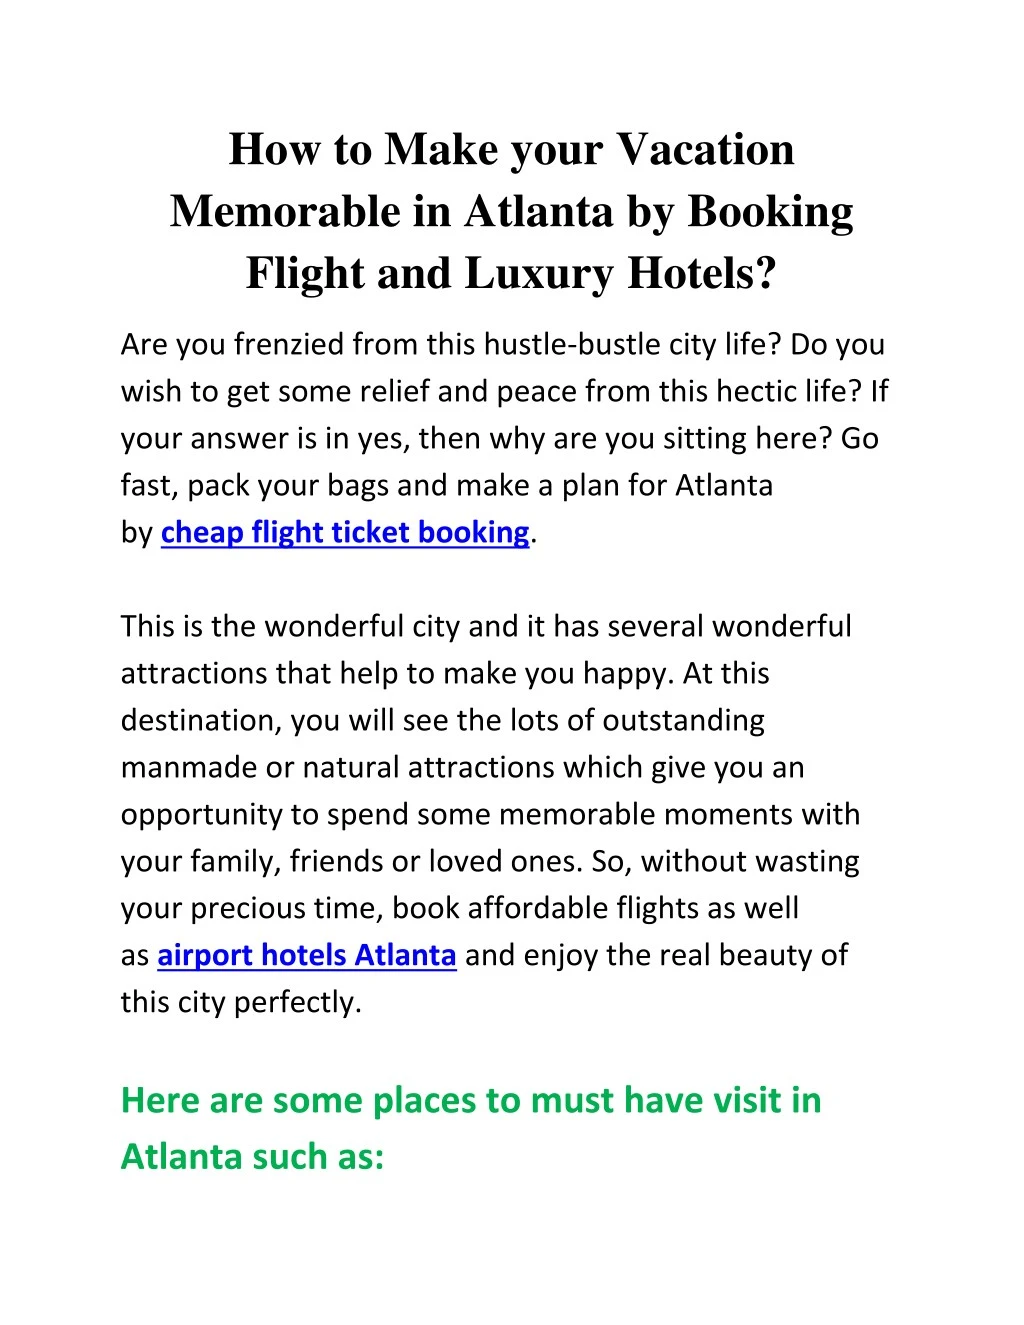 how to make your vacation memorable in atlanta